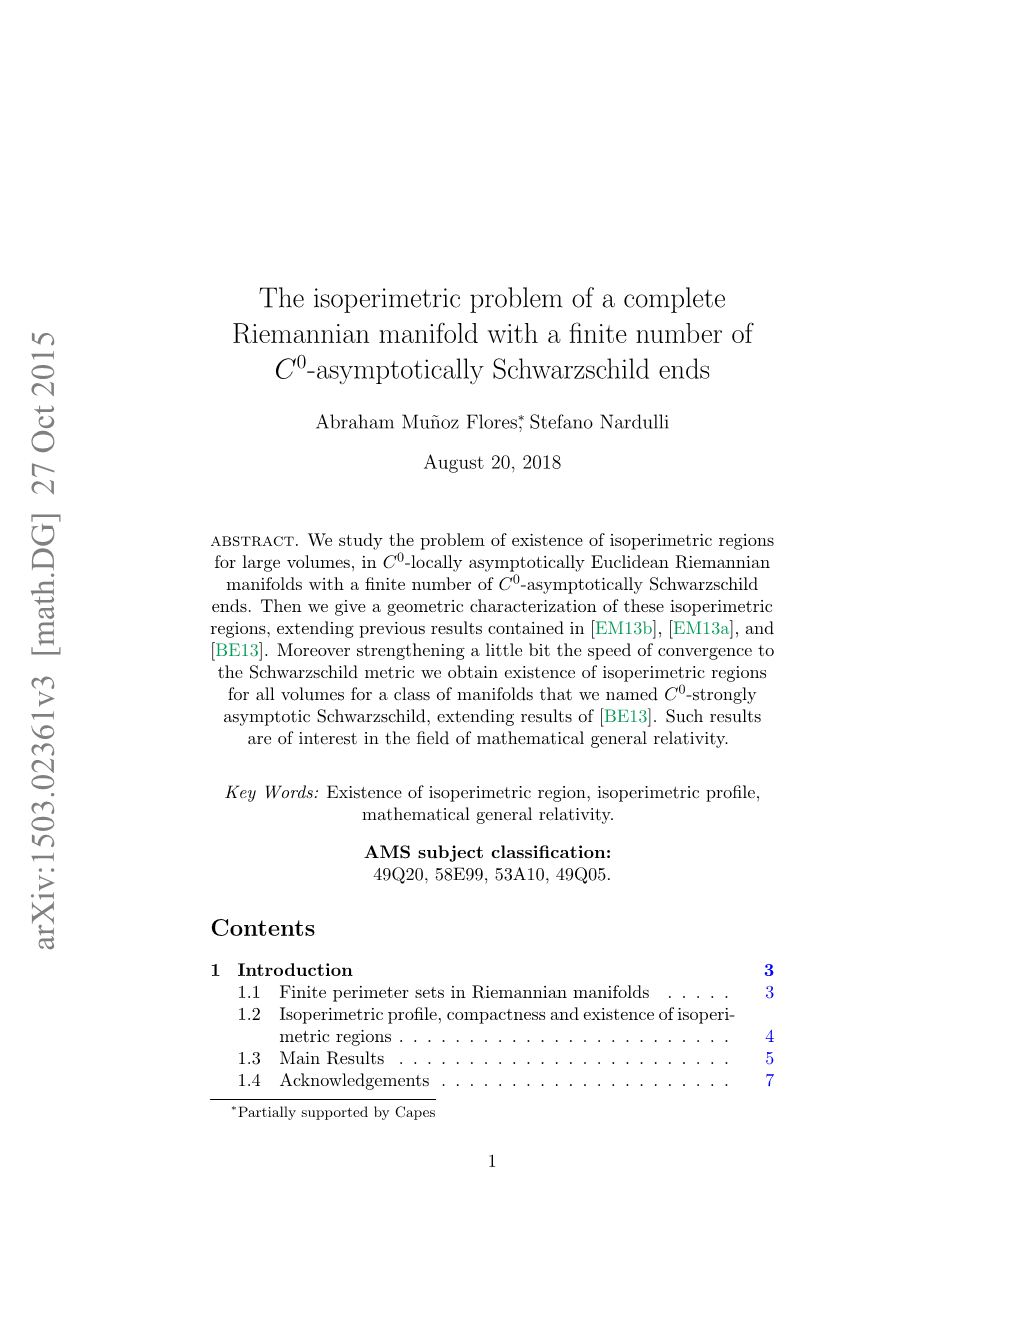 The Isoperimetric Problem of a Complete Riemannian Manifolds